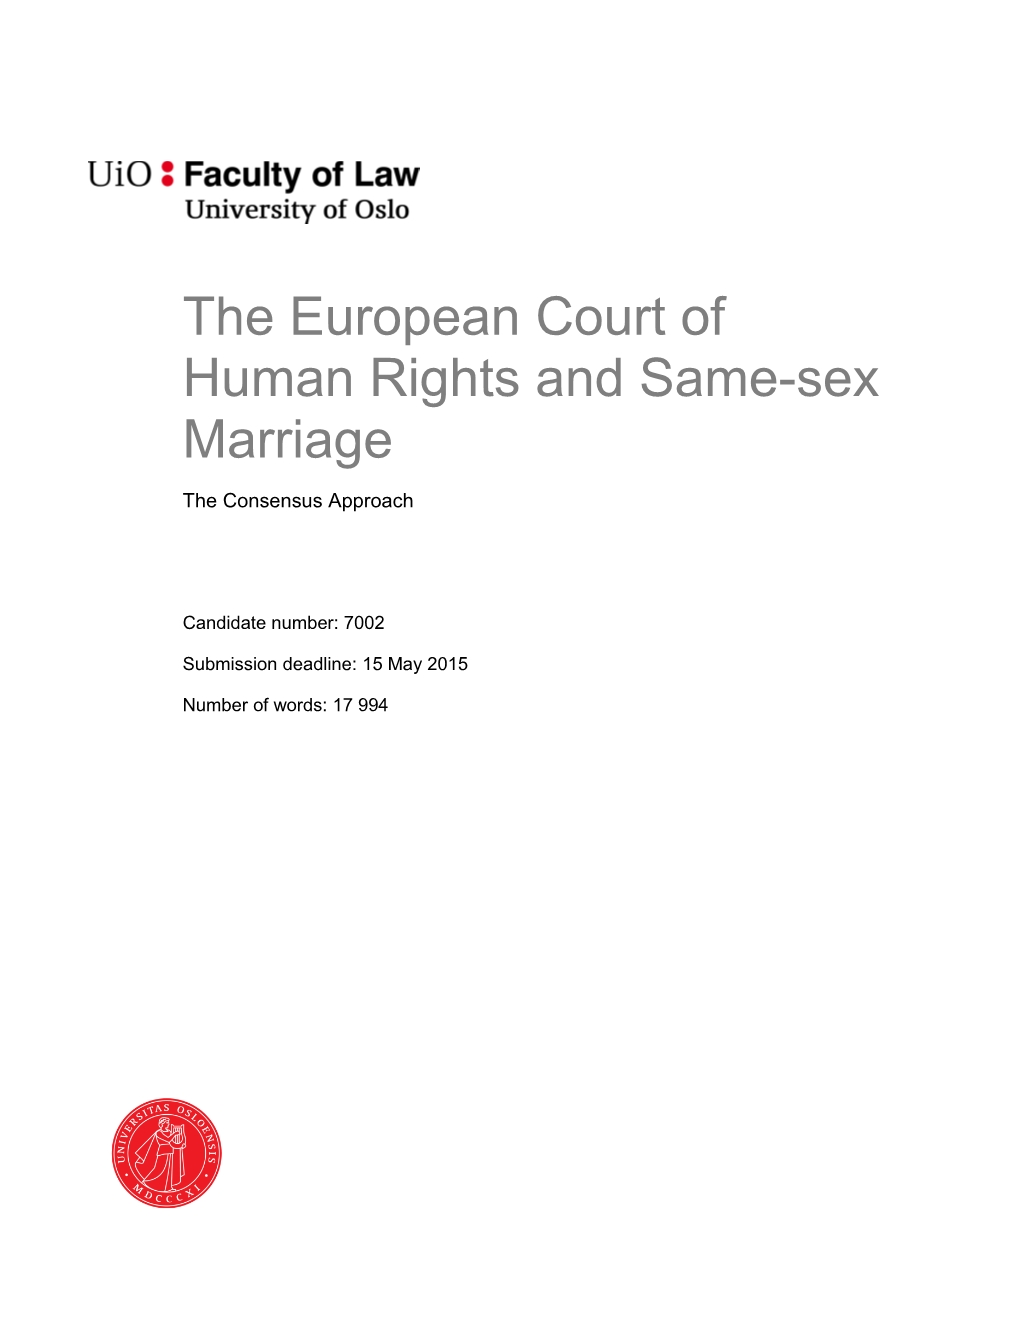 The European Court of Human Rights and Same-Sex Marriage